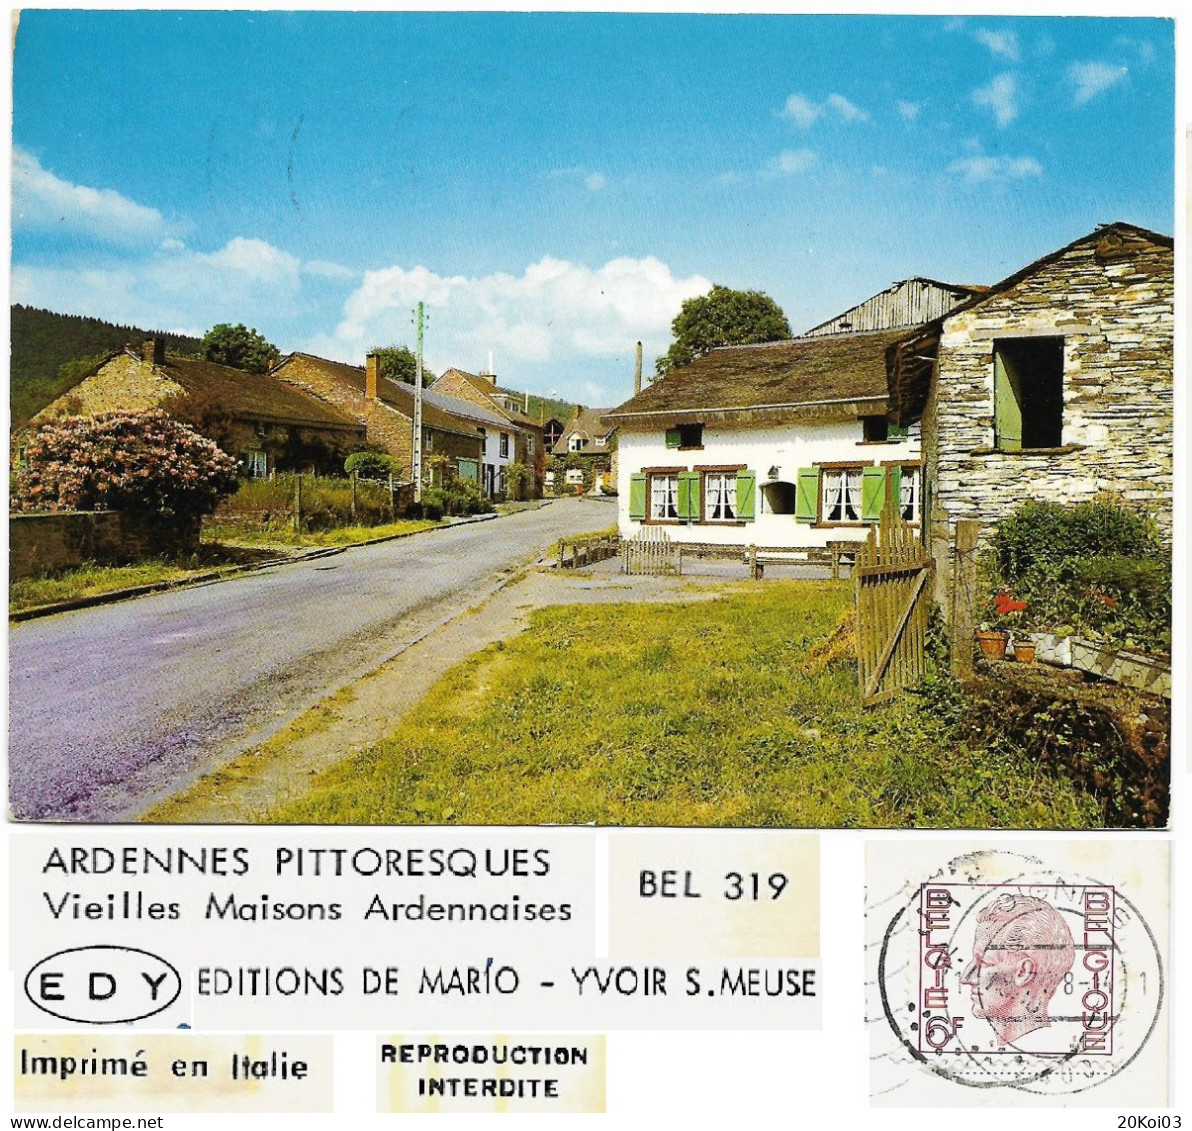 Ardennes Pittoresques Vieilles Maisons Ardennaises (+/-Tintigny)_Luxembourg_CPSM Vintage - Tintigny